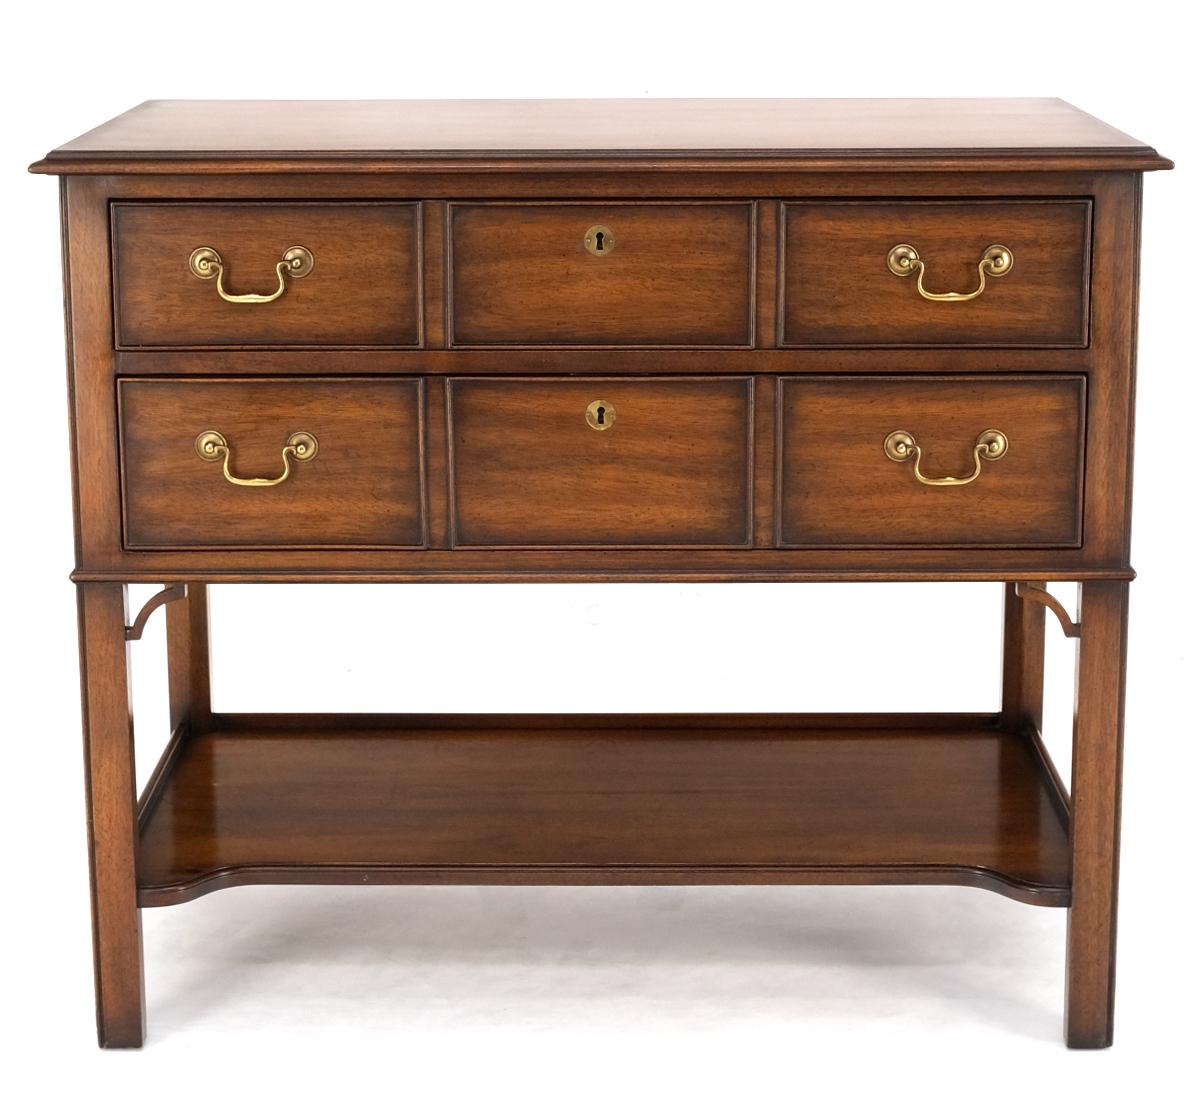 Mahogany Brass Hardware Kindel Entry Hall Chest Console Table Buffet Cabinet 8